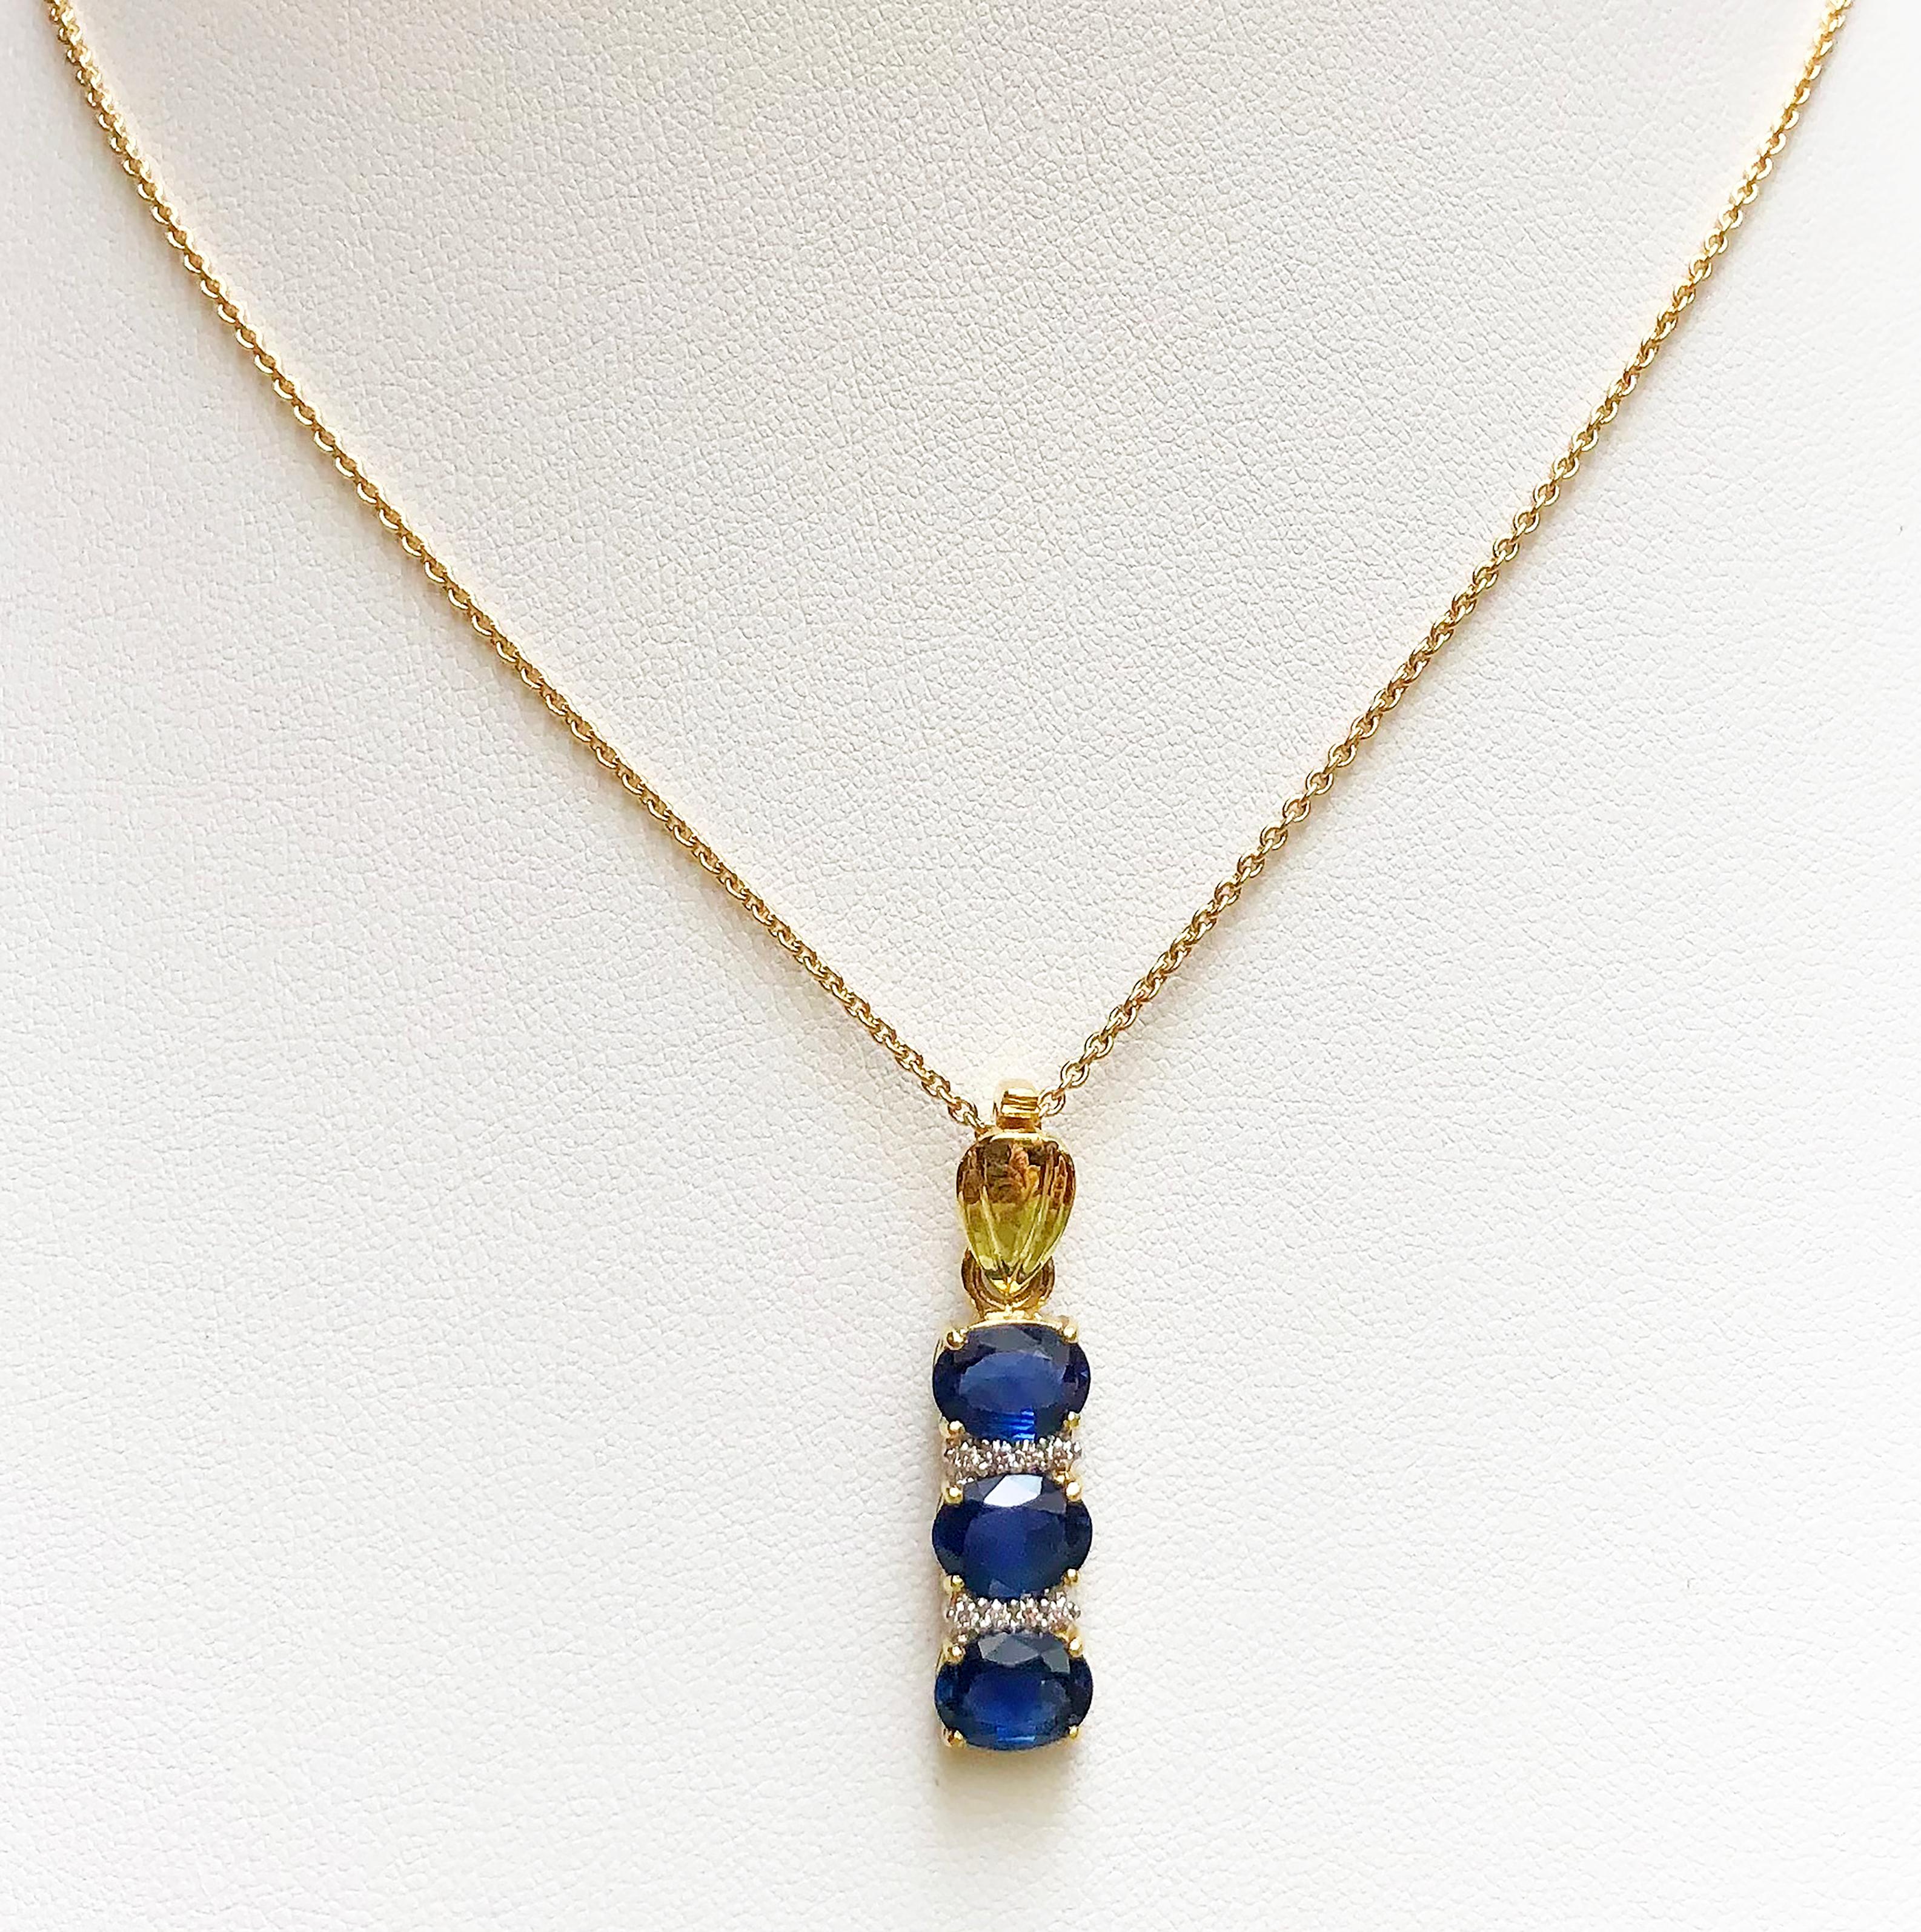 Blue Sapphire 3.96 carats with Diamond 0.10 carat Pendant set in 18 Karat Gold Settings
(chain not included)

Width:  0.8 cm 
Length: 3.3 cm
Total Weight: 5.52 grams

